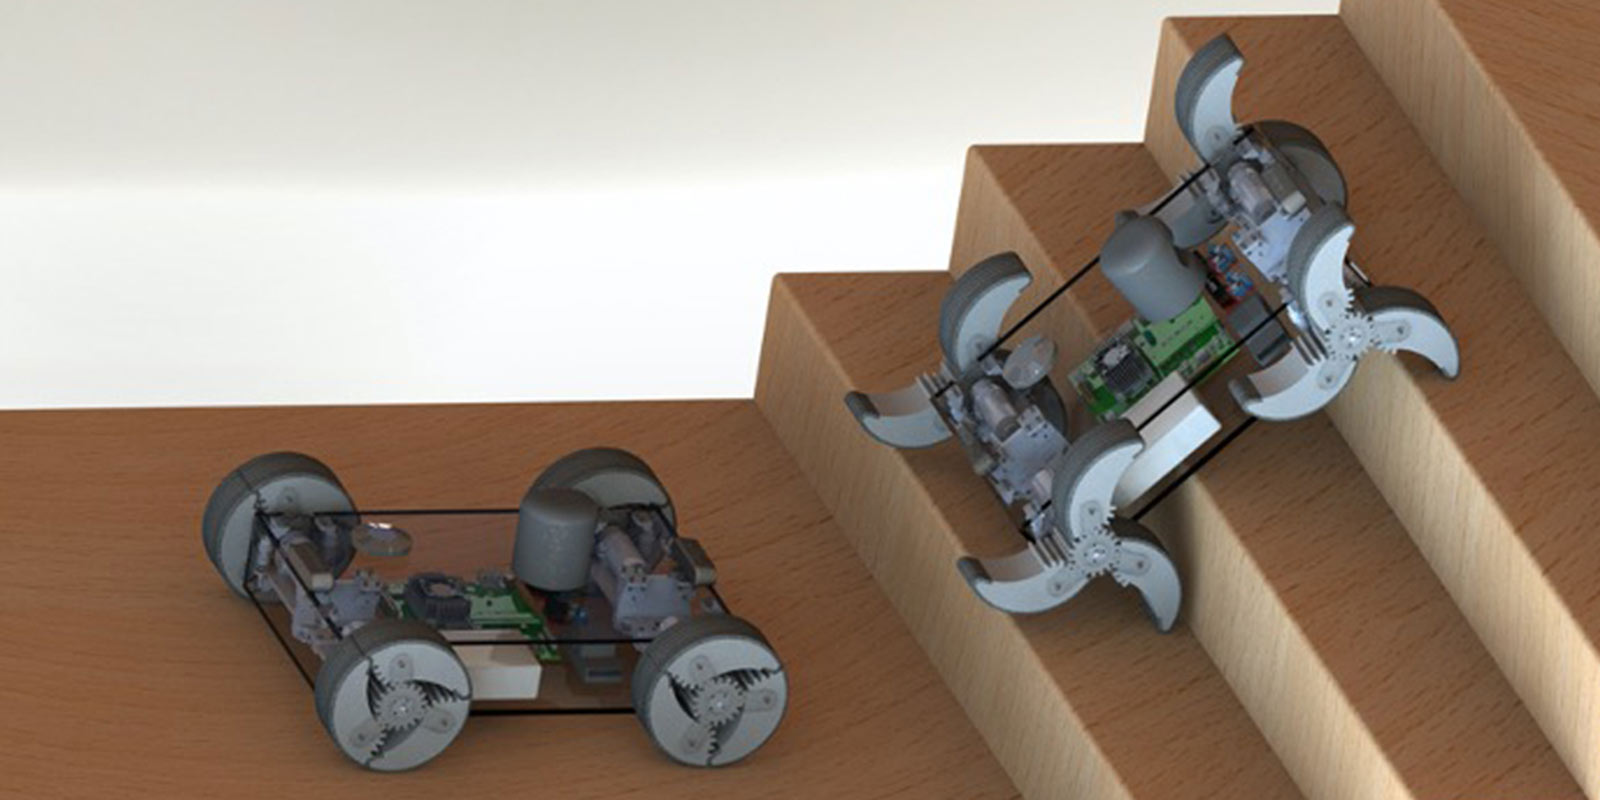 Concept illustration of the adaptable Wheel-and-Leg Transformable Robot currently being developed under a Defense Advanced Research Projects Agency contract.